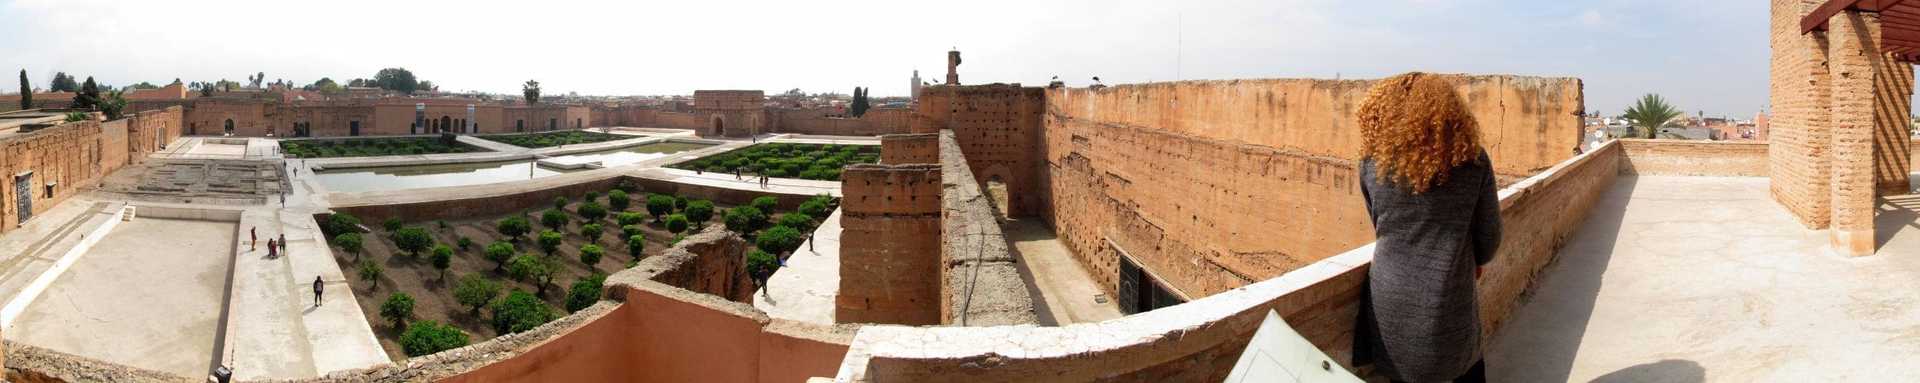 Old palace ruins in Marrakesh